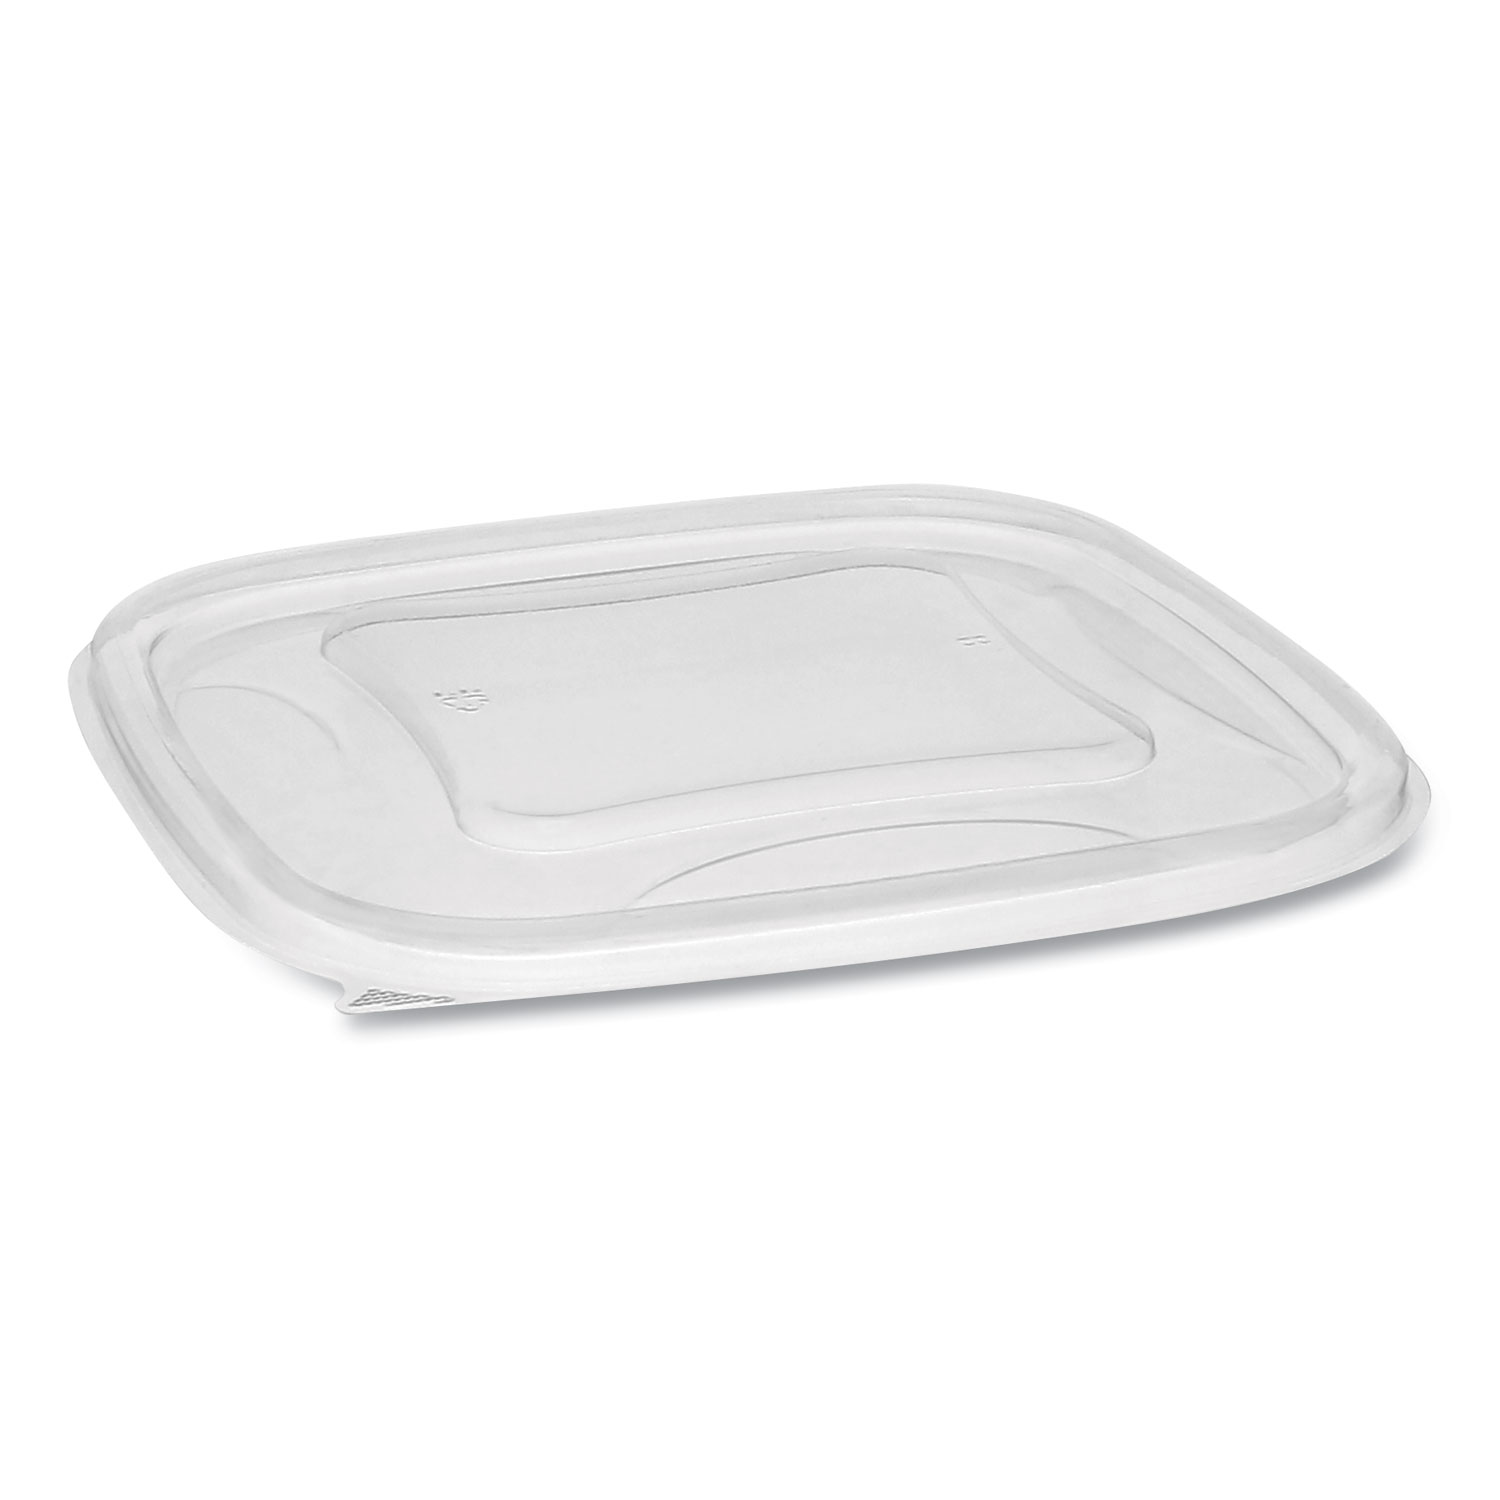 Pactiv EarthChoice Recycled Plastic Square Flat Lids, 7.38 x 7.38 x 0.26, Clear, 300/Carton